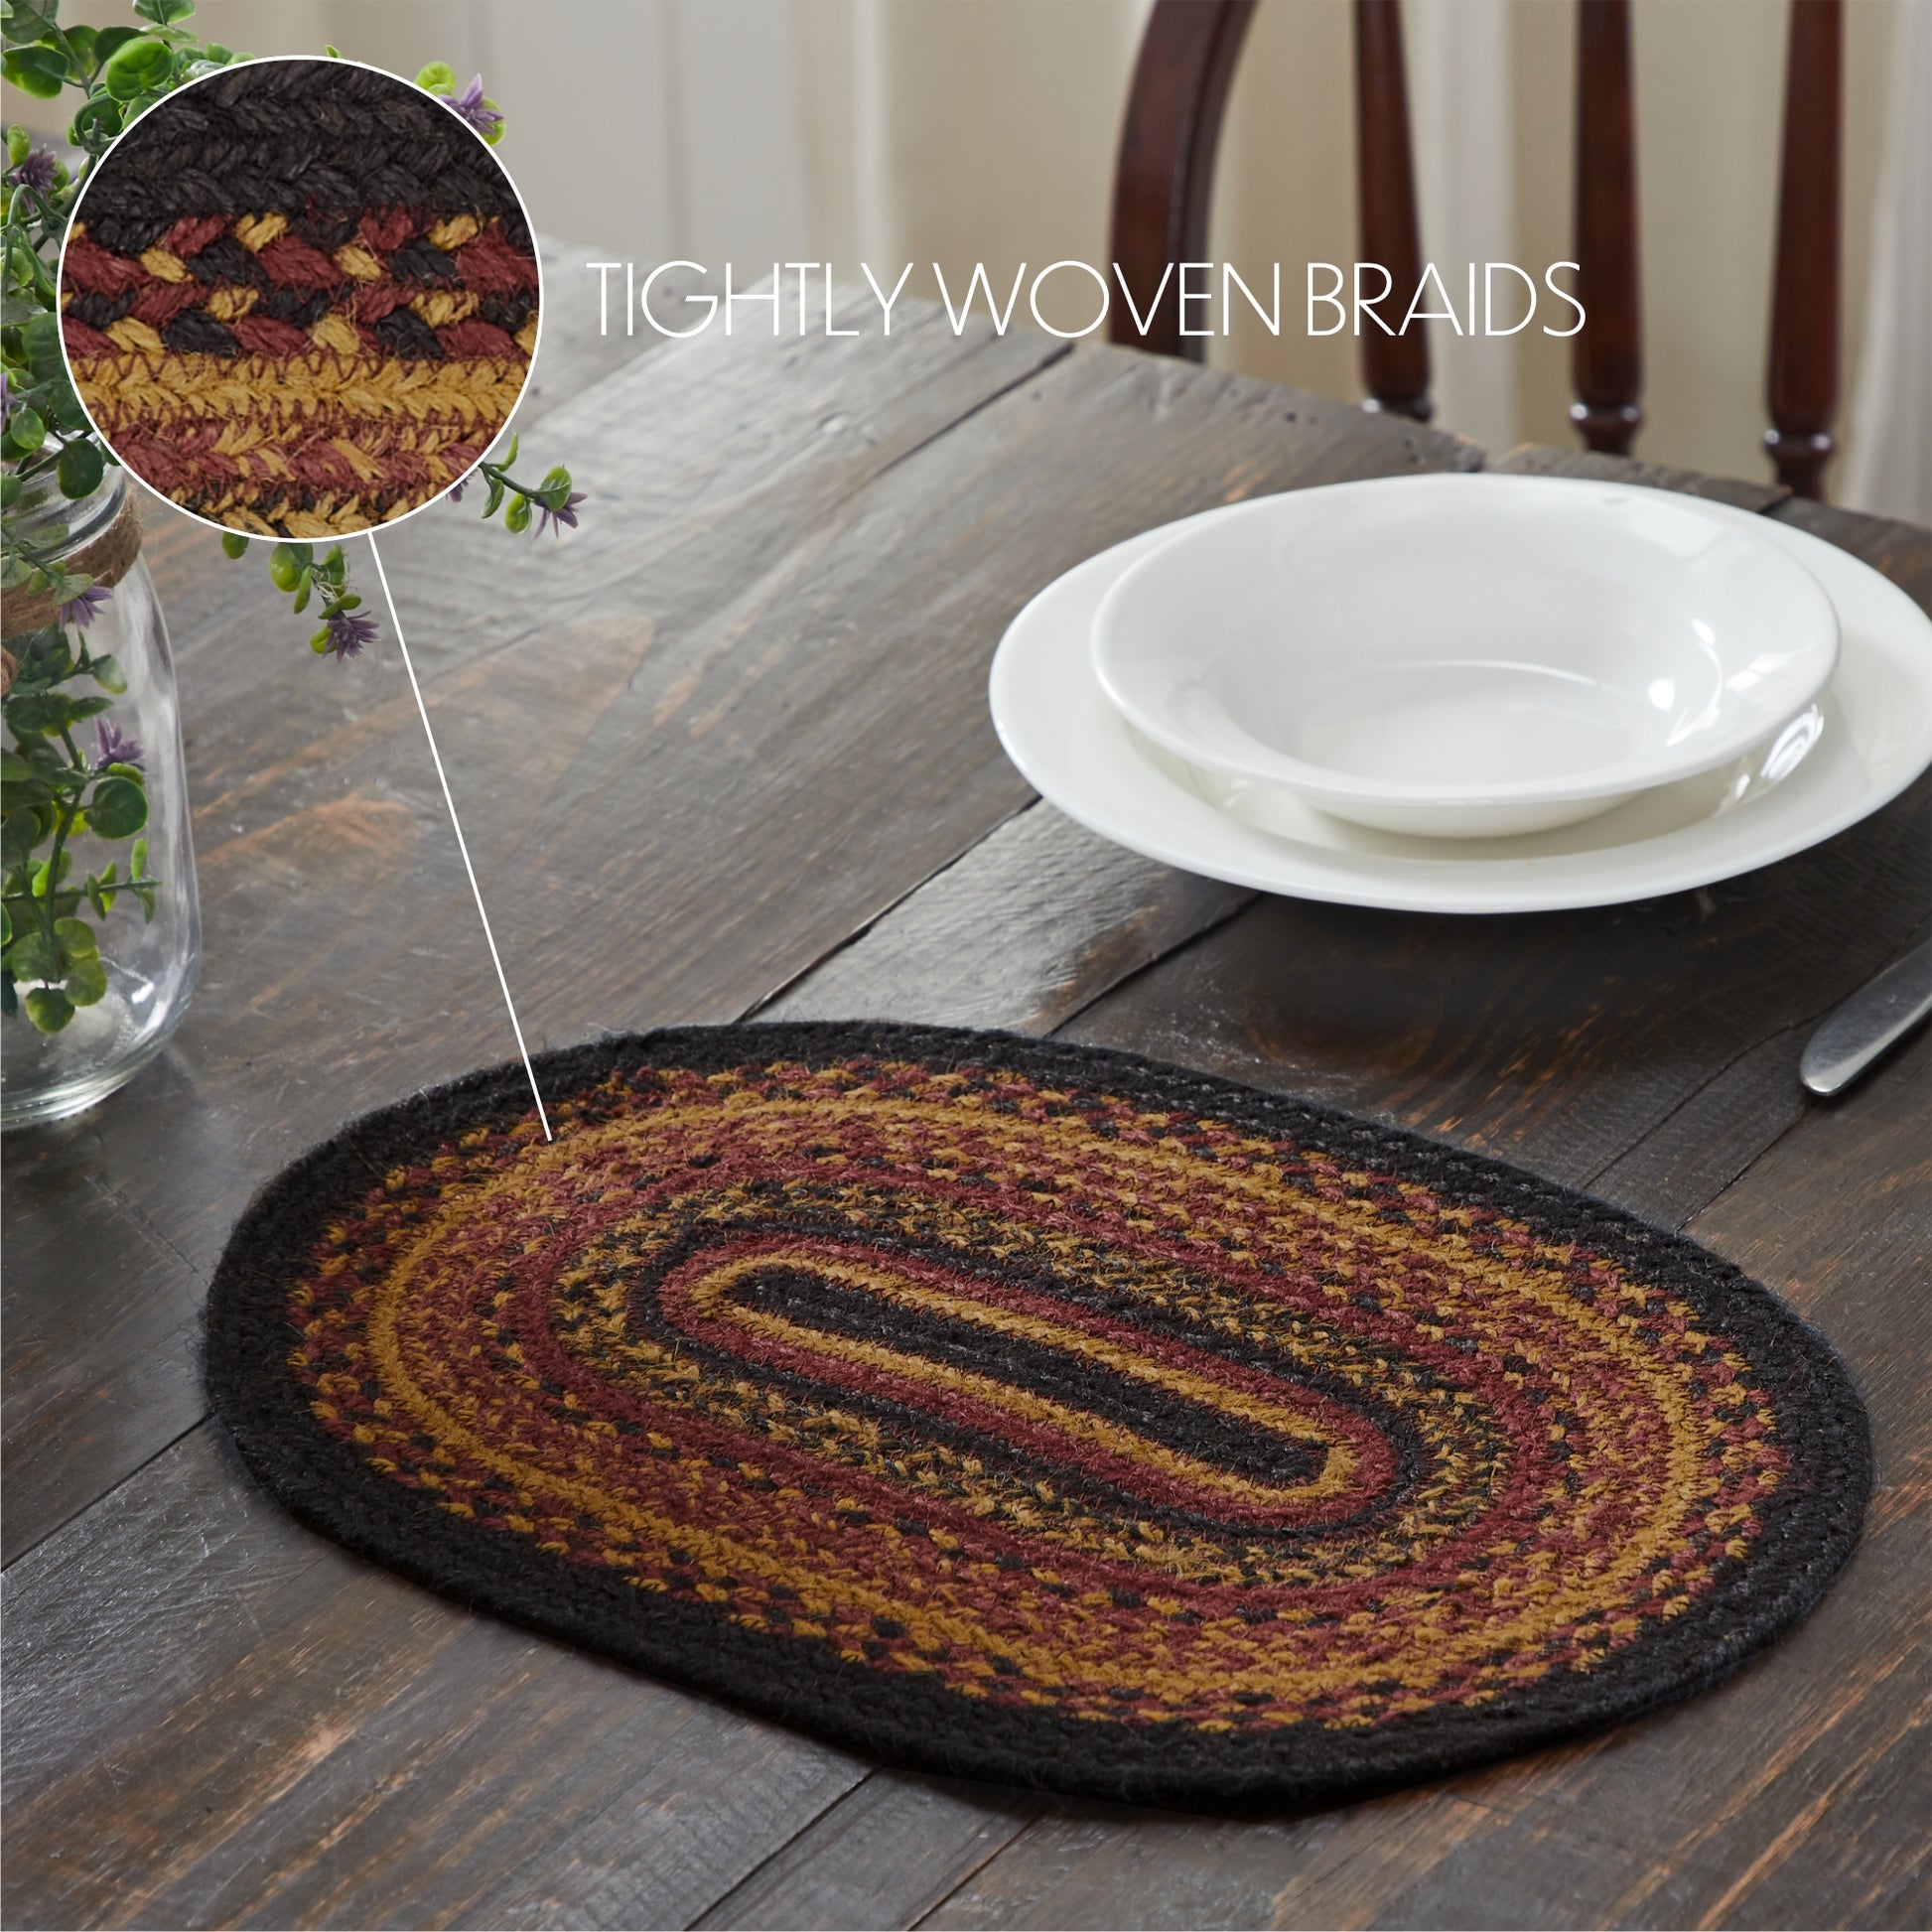 81363-Heritage-Farms-Jute-Oval-Placemat-12x18-image-2